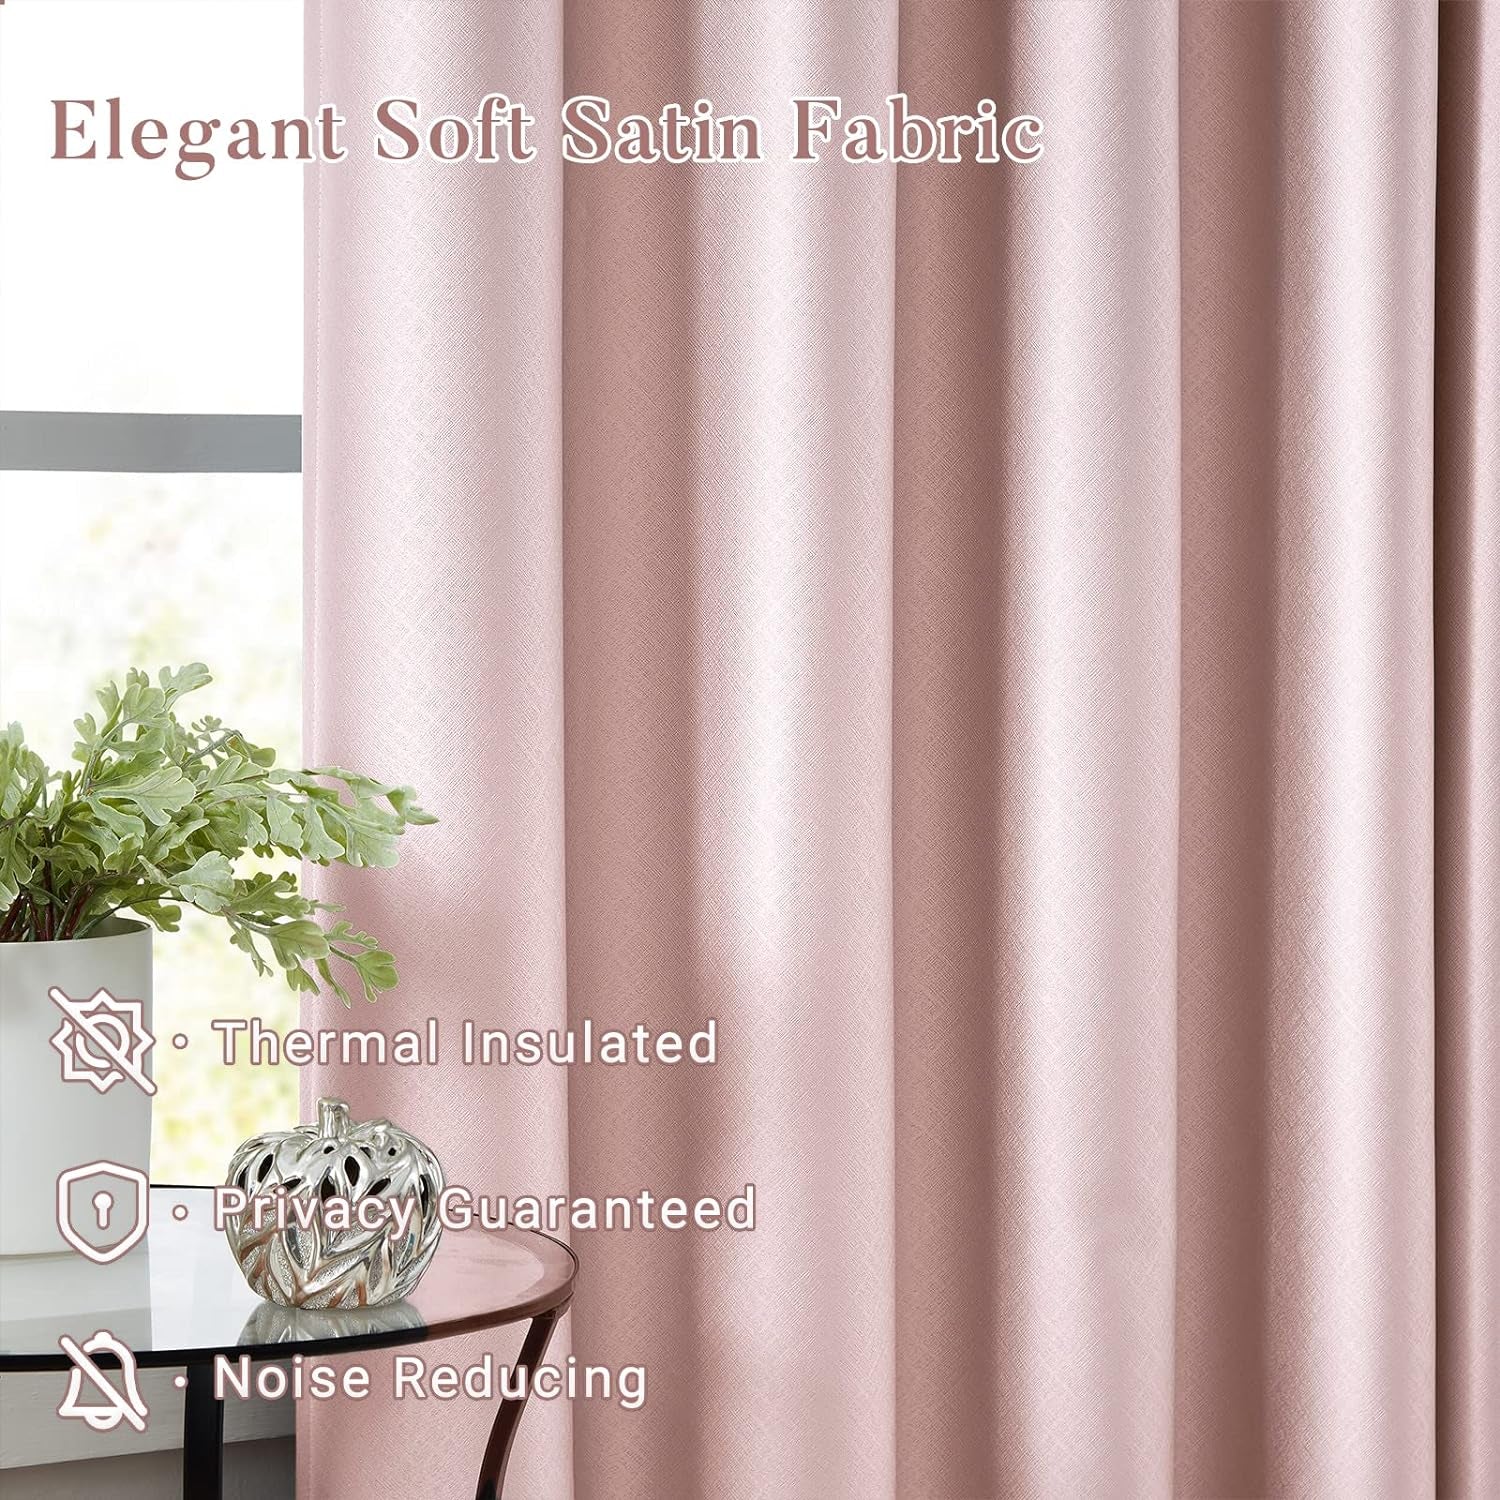 Melodieux Pink Blackout Curtains 84 Inches Long for Bedroom, Thermal Insulated Energy Saving Grommet Embossed Satin Drapes with Black Lining, 52 by 84 Inch, 2 Panels  Melodieux   